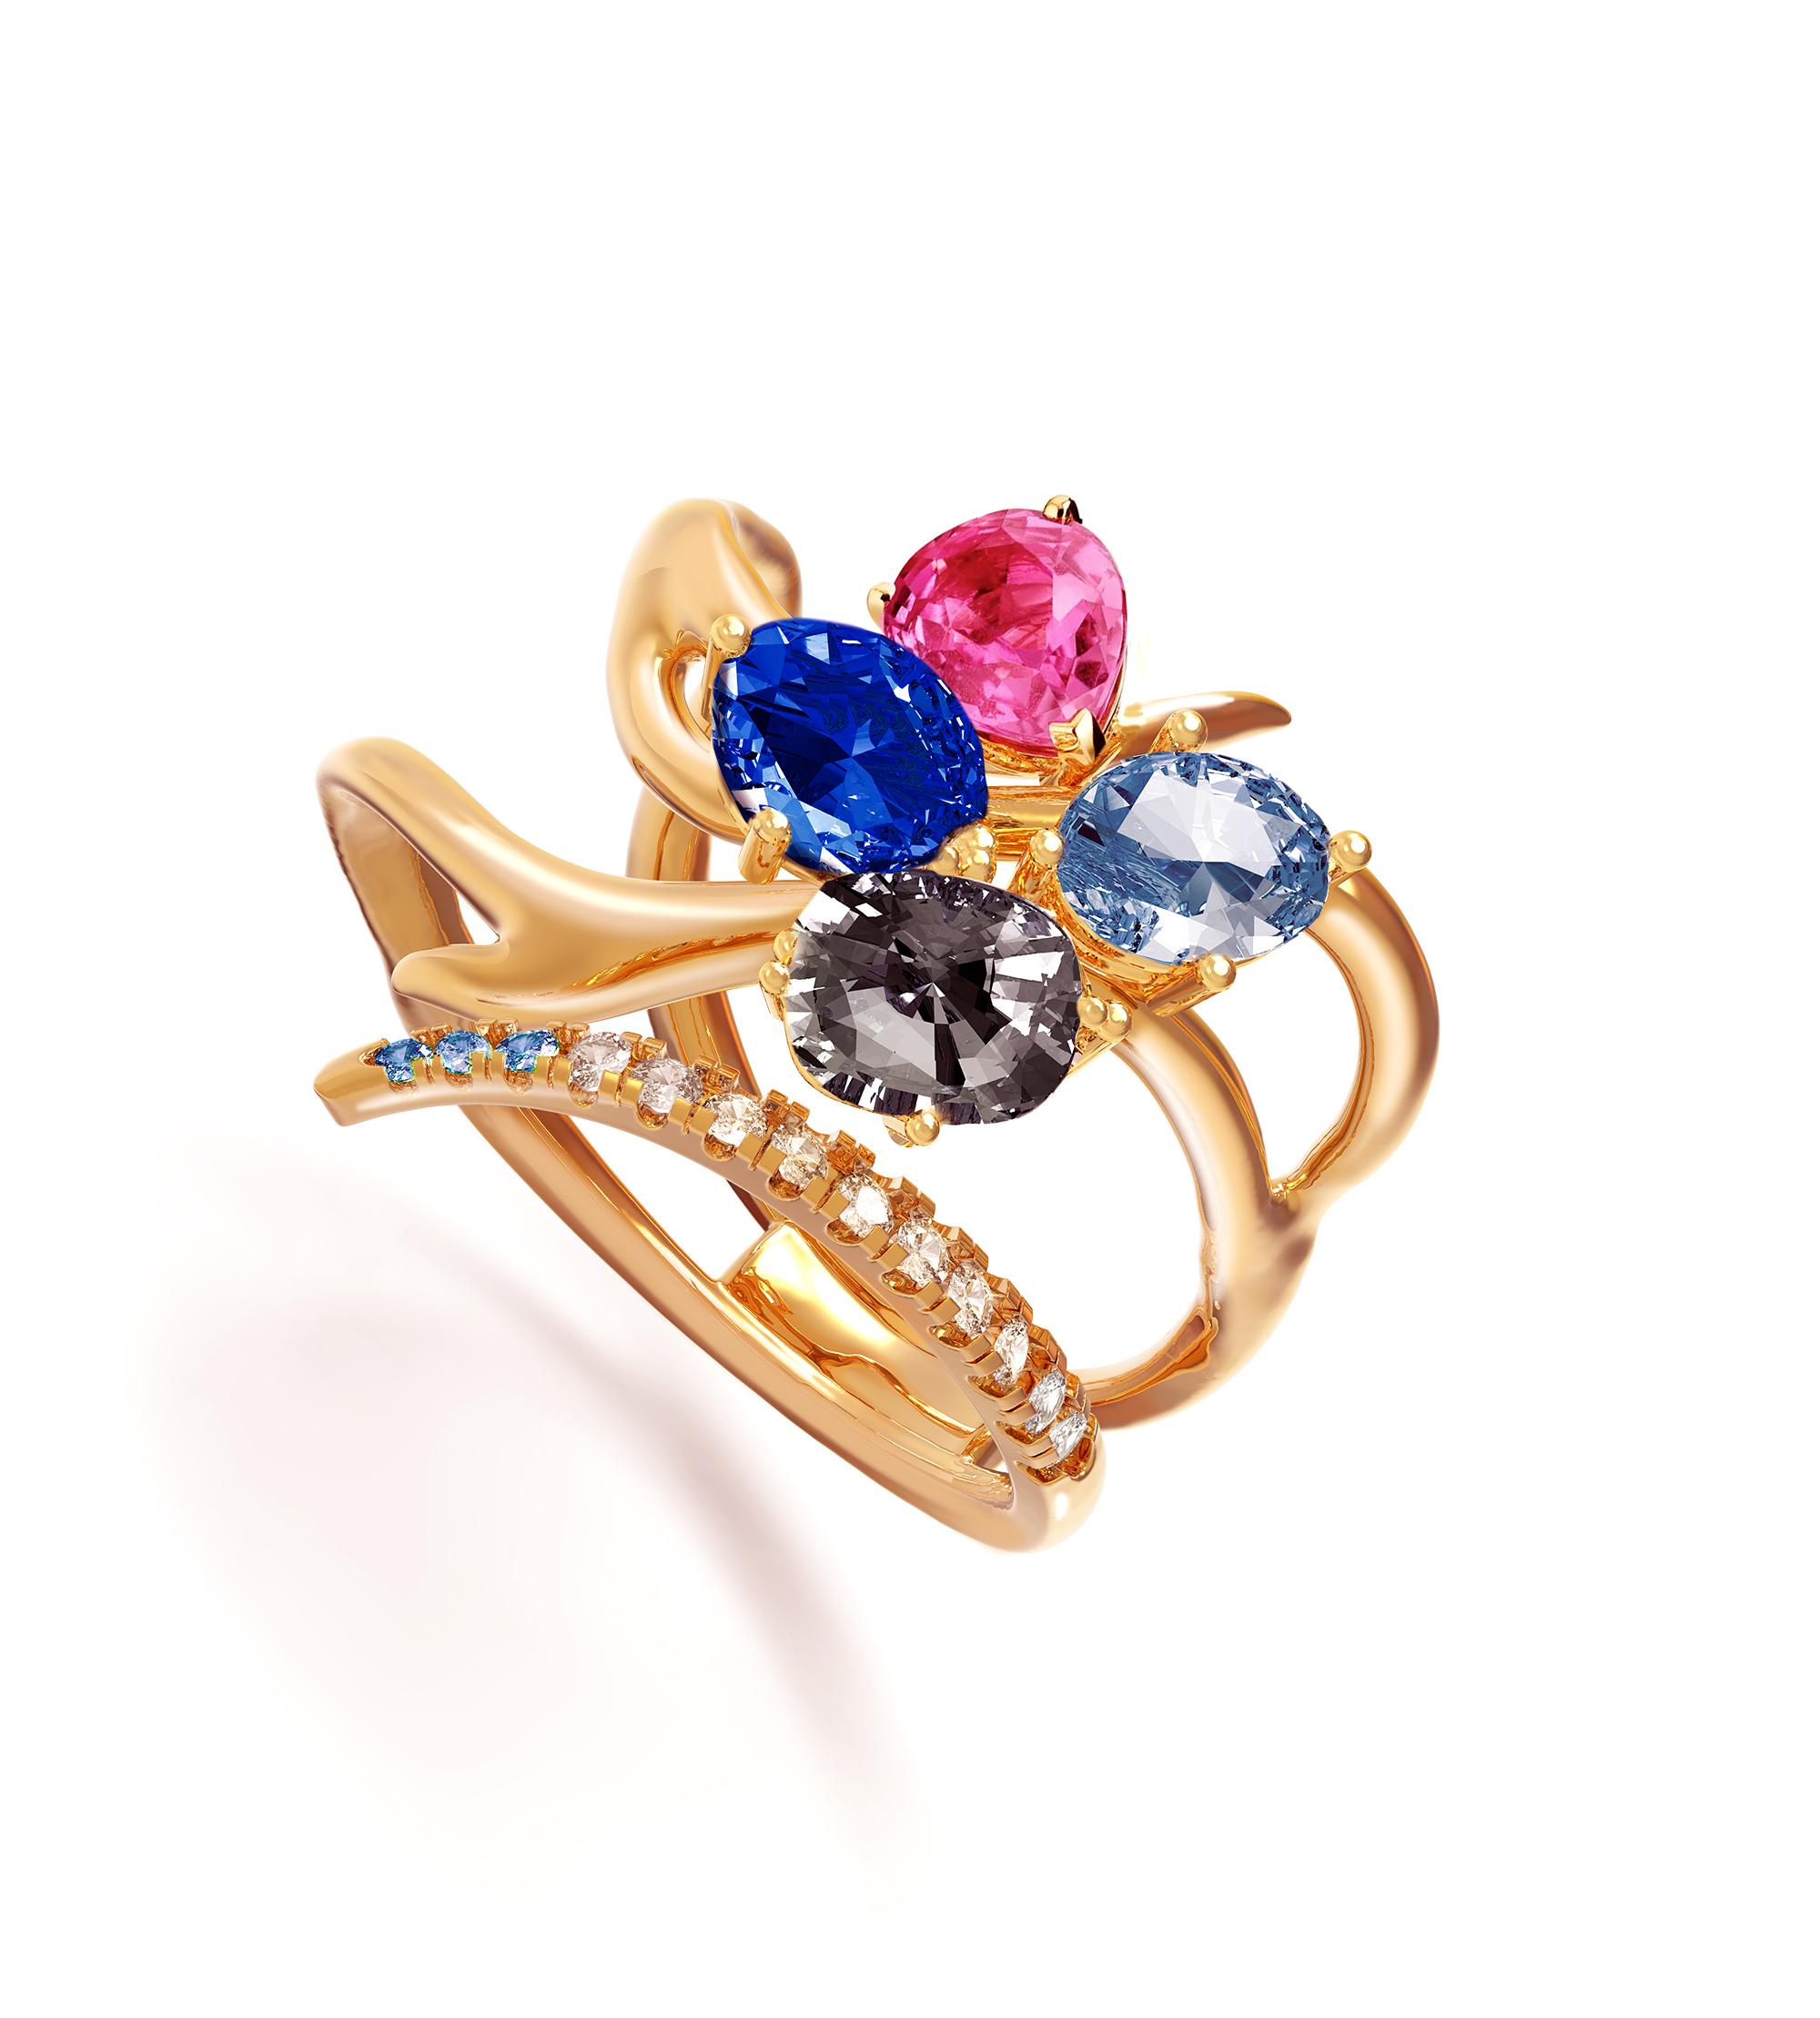 This Harajuku contemporary ring is made of 18 karat yellow gold with natural gems on your choice custom made. This piece can be personally signed for the same price.
The gems are:
Oval cut 3,5 carats natural unheated untreated vivid corn flower blue